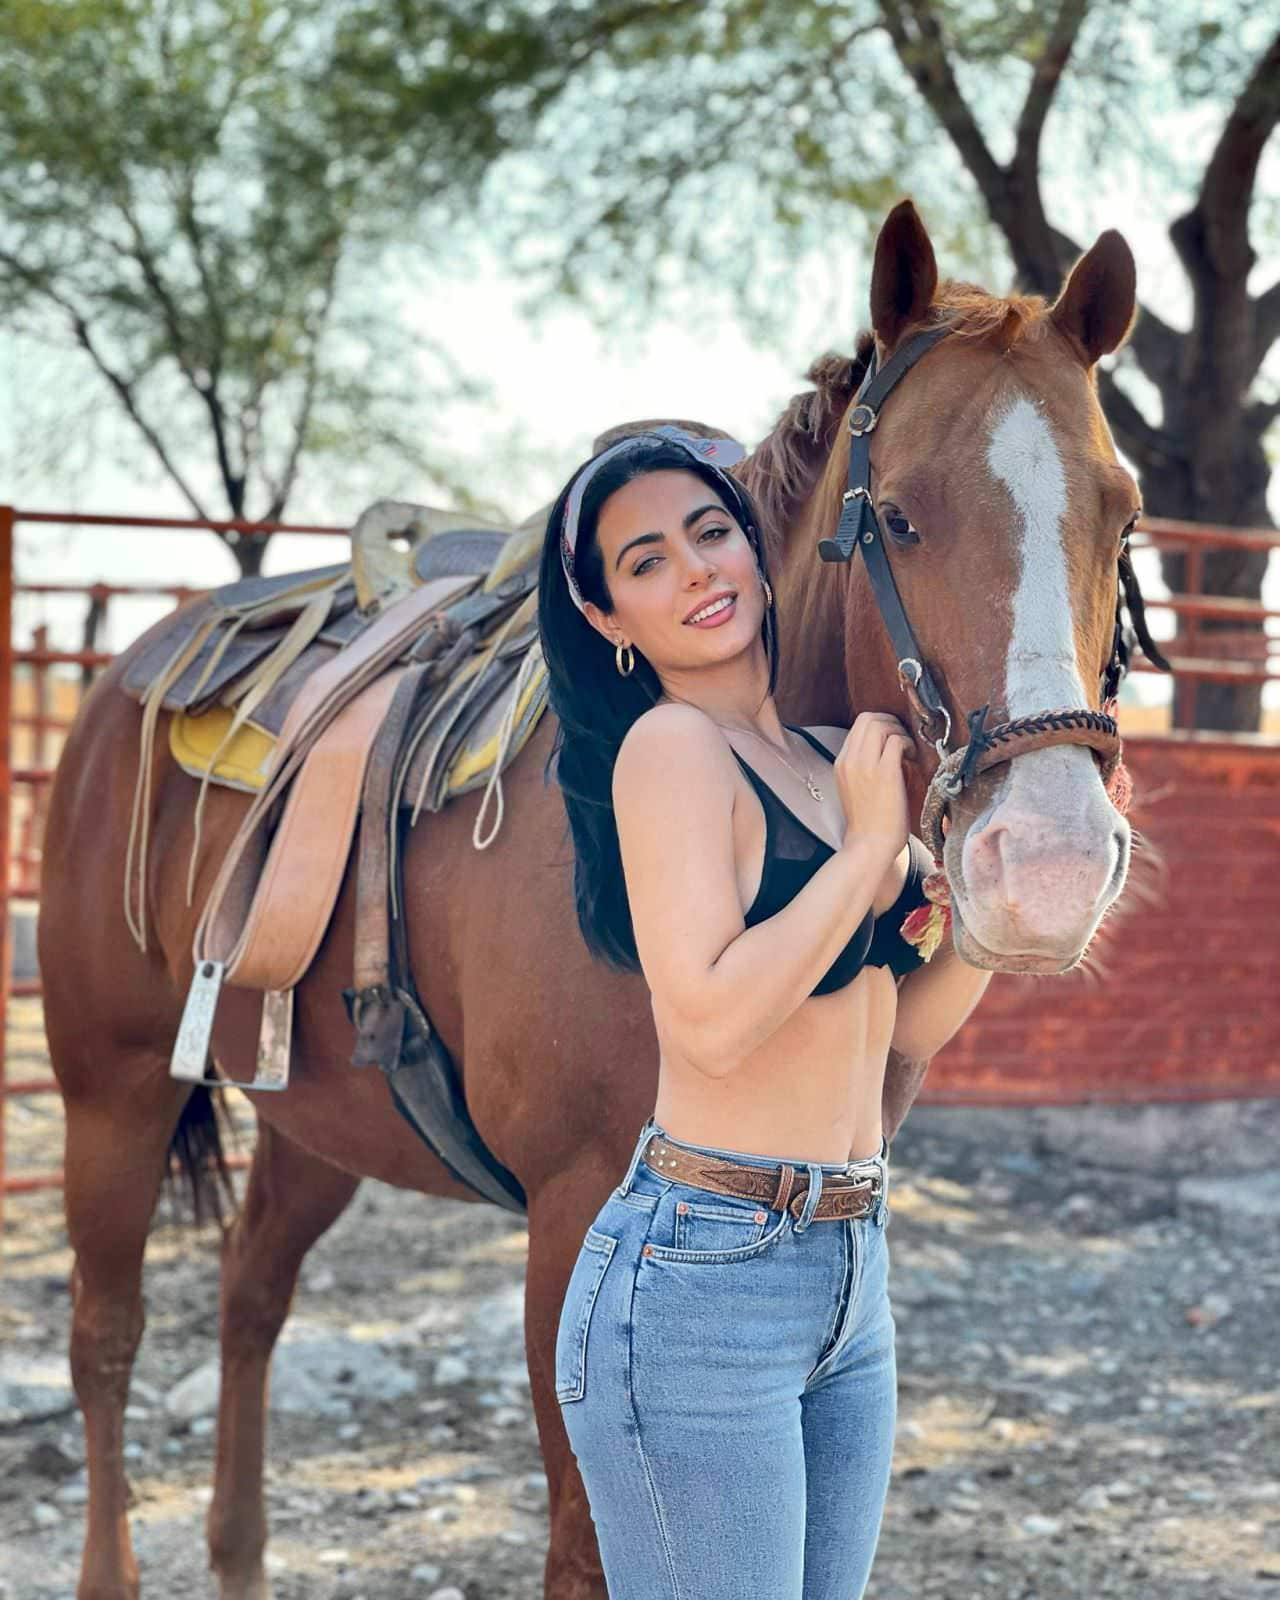 Emeraude Toubia Shared her Chic Style on Social Media